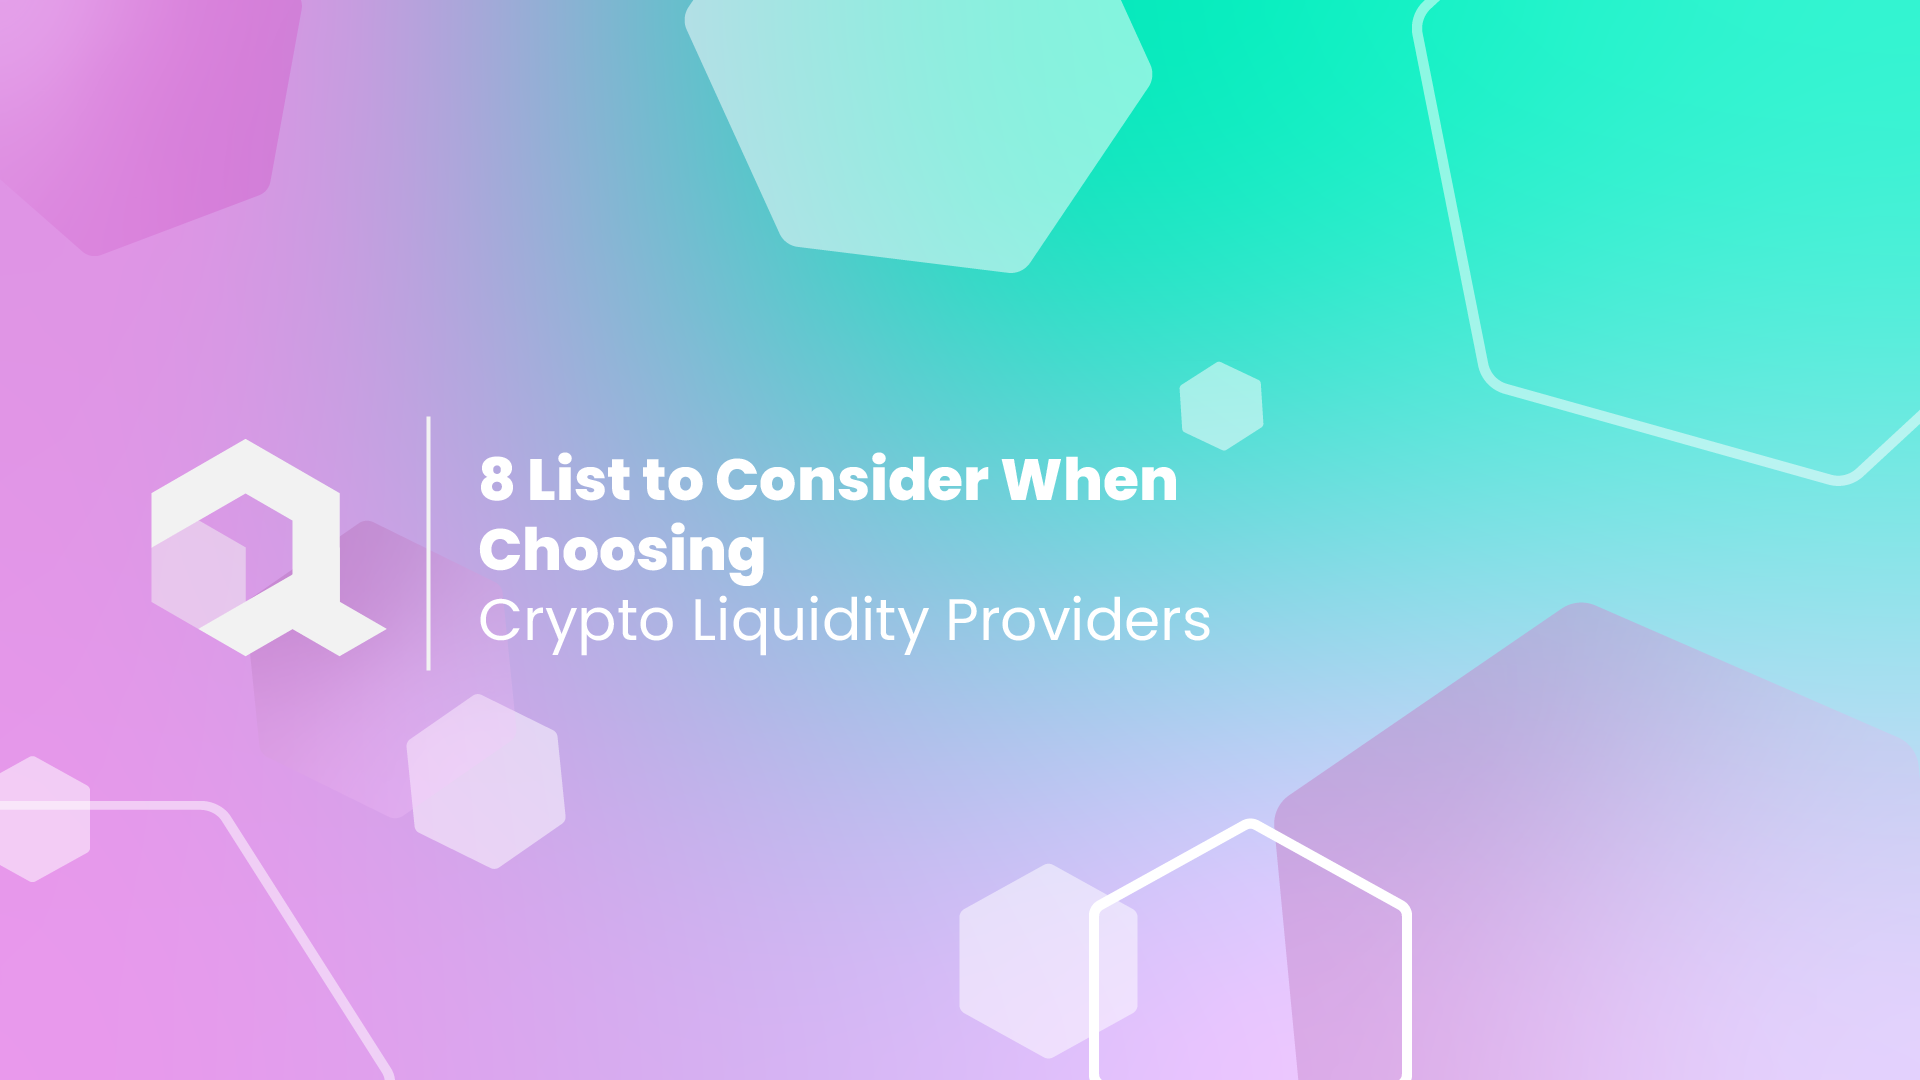 8 List to Consider When Choosing Crypto Liquidity Providers